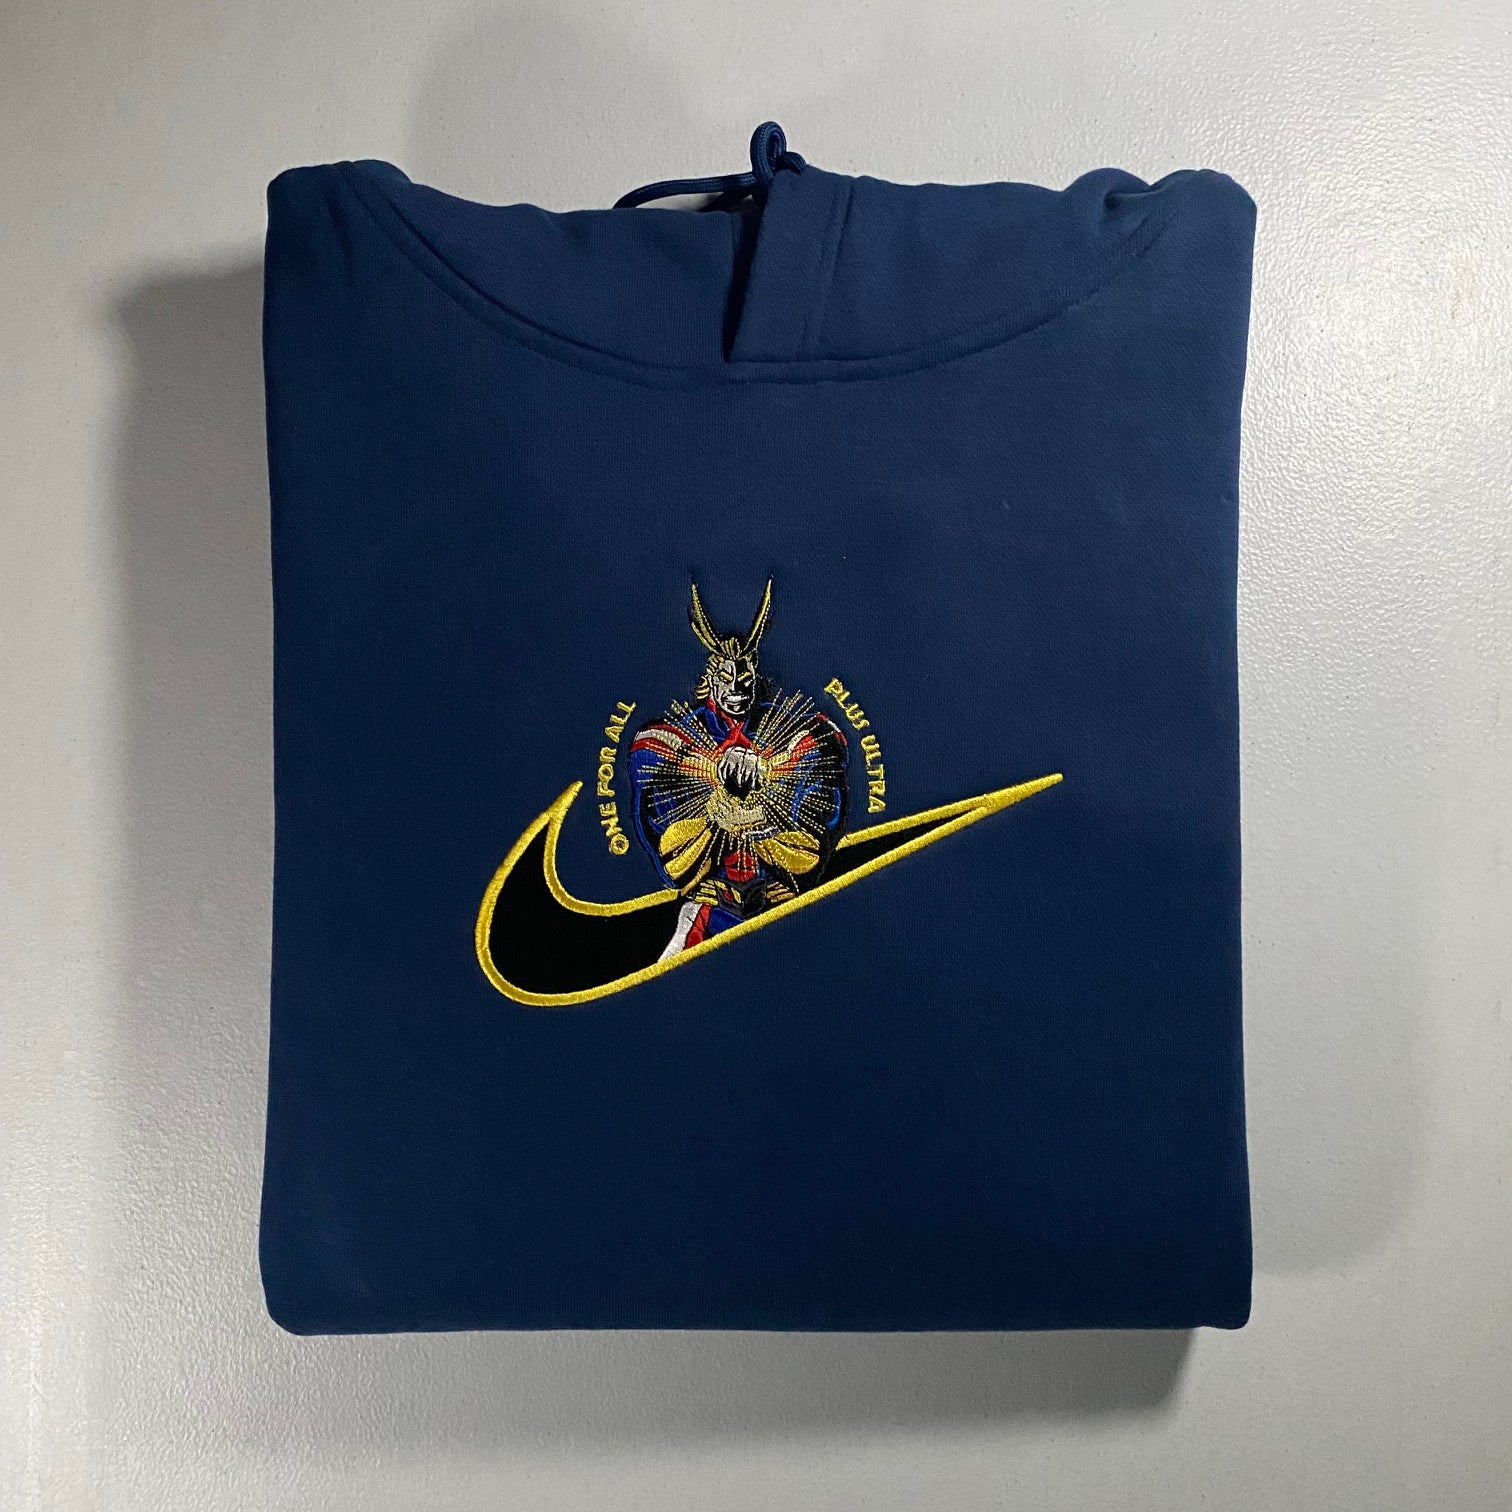 LIMITED MHA X All Might Plus Ultra EMBROIDERED HOODIE